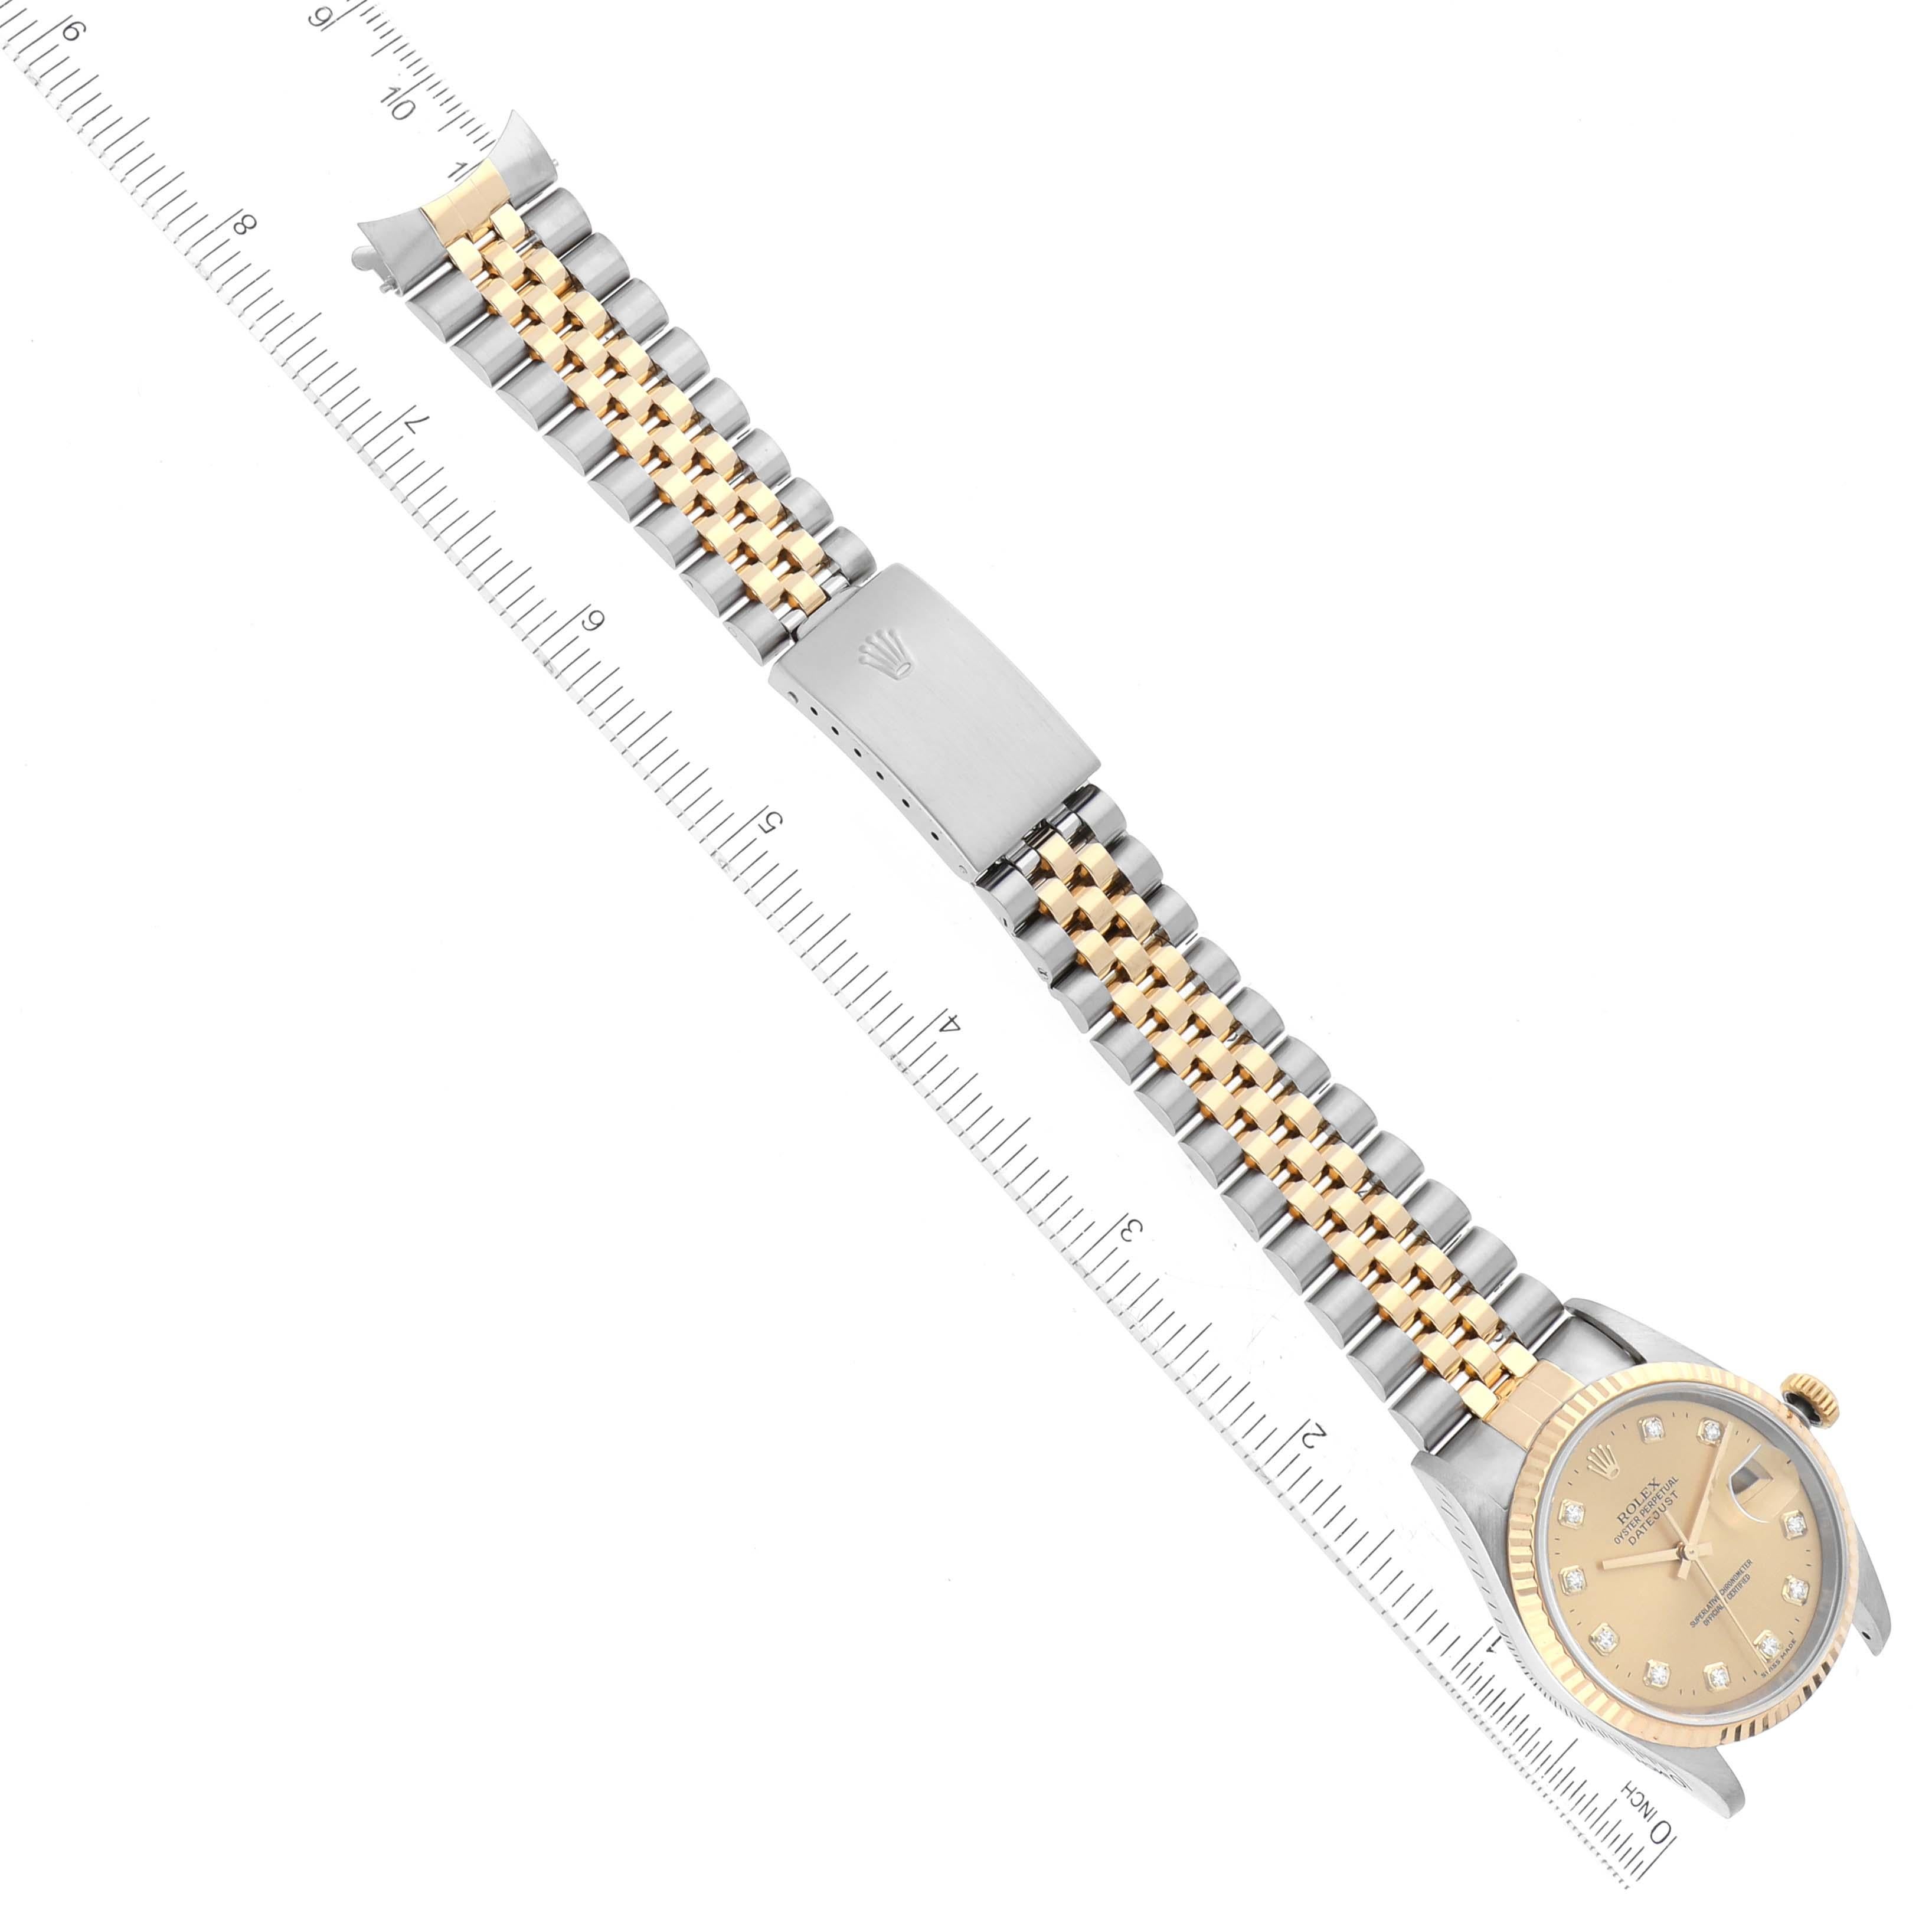 Rolex Datejust Champagne Diamond Dial Steel Yellow Gold Mens Watch 16233 7